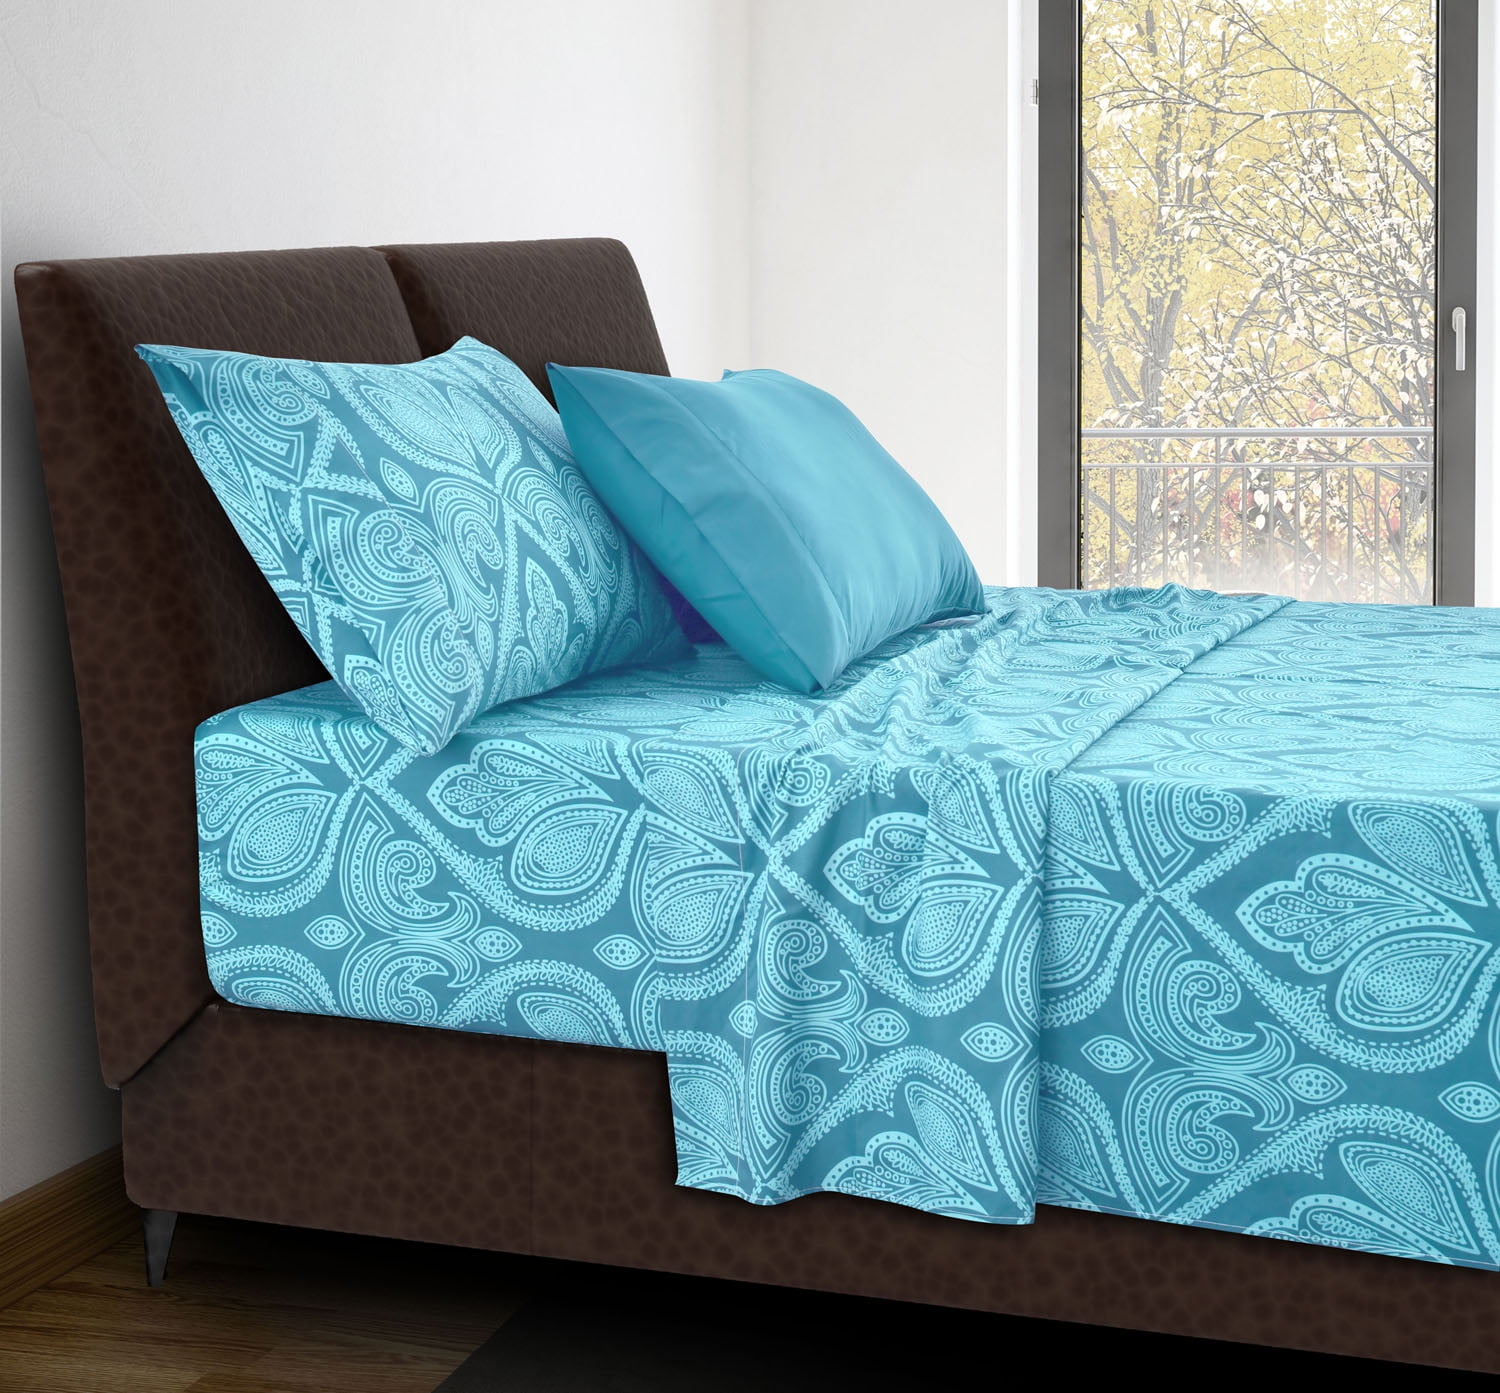 Details about   Poly Cotton Teal King Size Flat Bed Sheet Long Staple Polycotton Flat Bed Sheets 